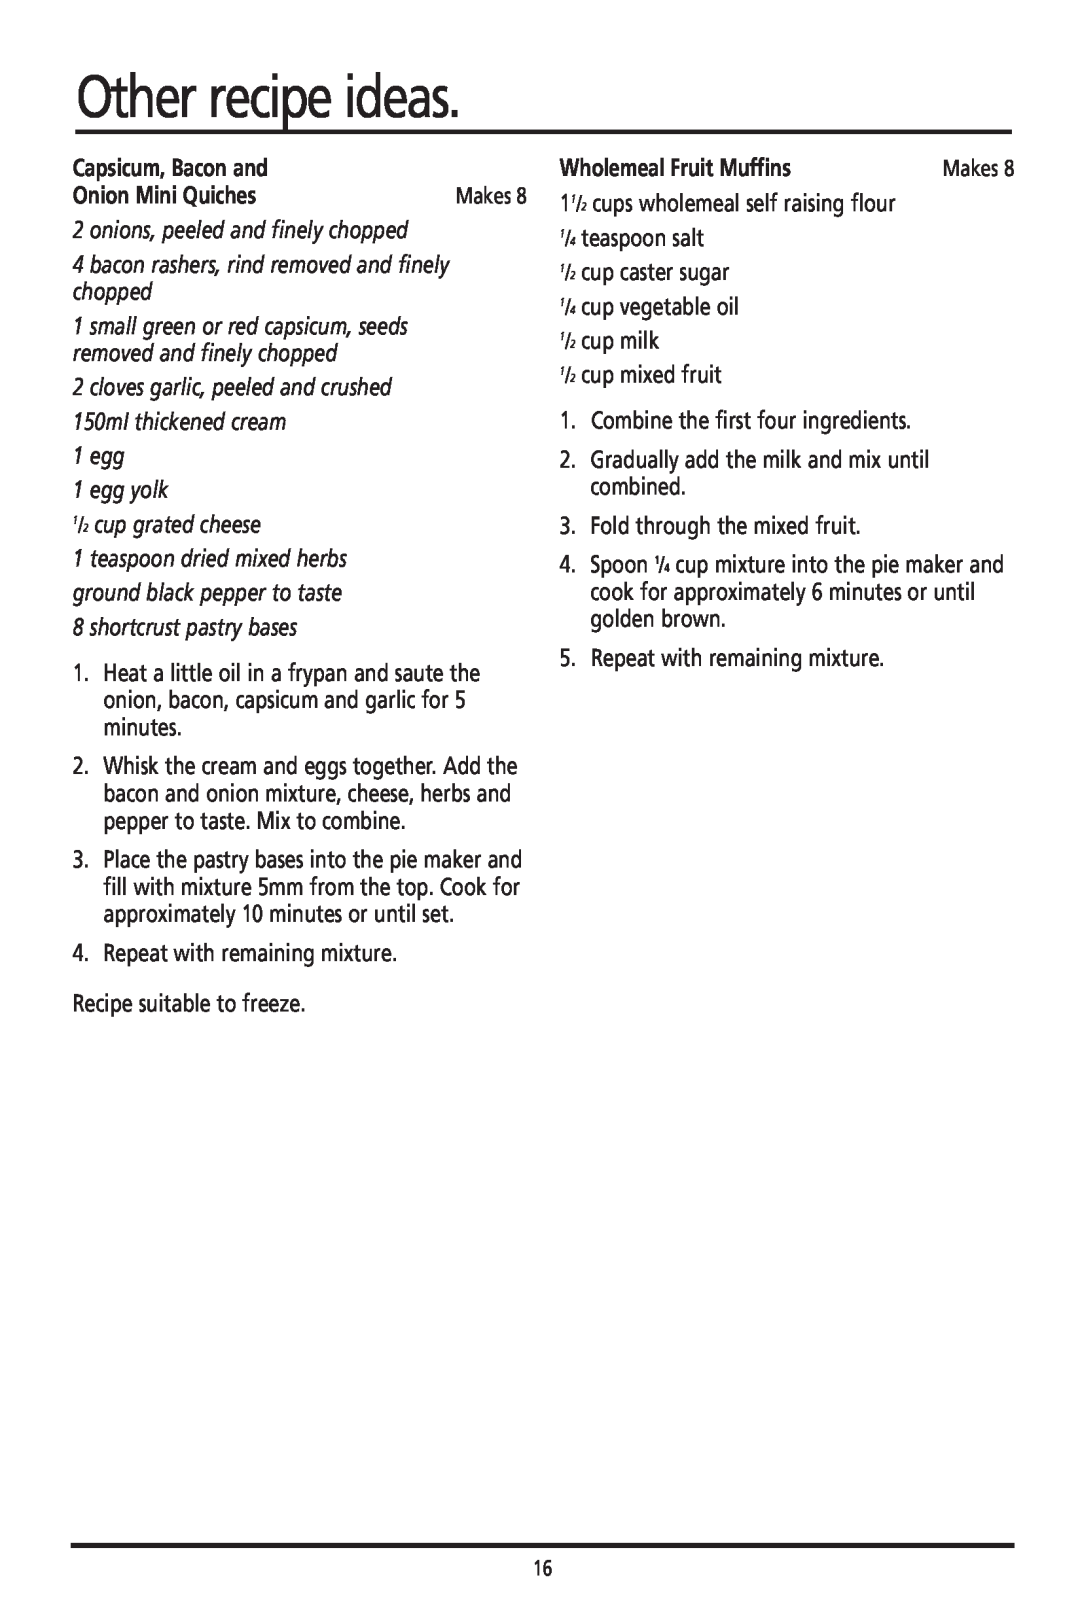 Sunbeam PM040 manual Other recipe ideas, Capsicum, Bacon and, Onion Mini Quiches, Wholemeal Fruit Muffins 